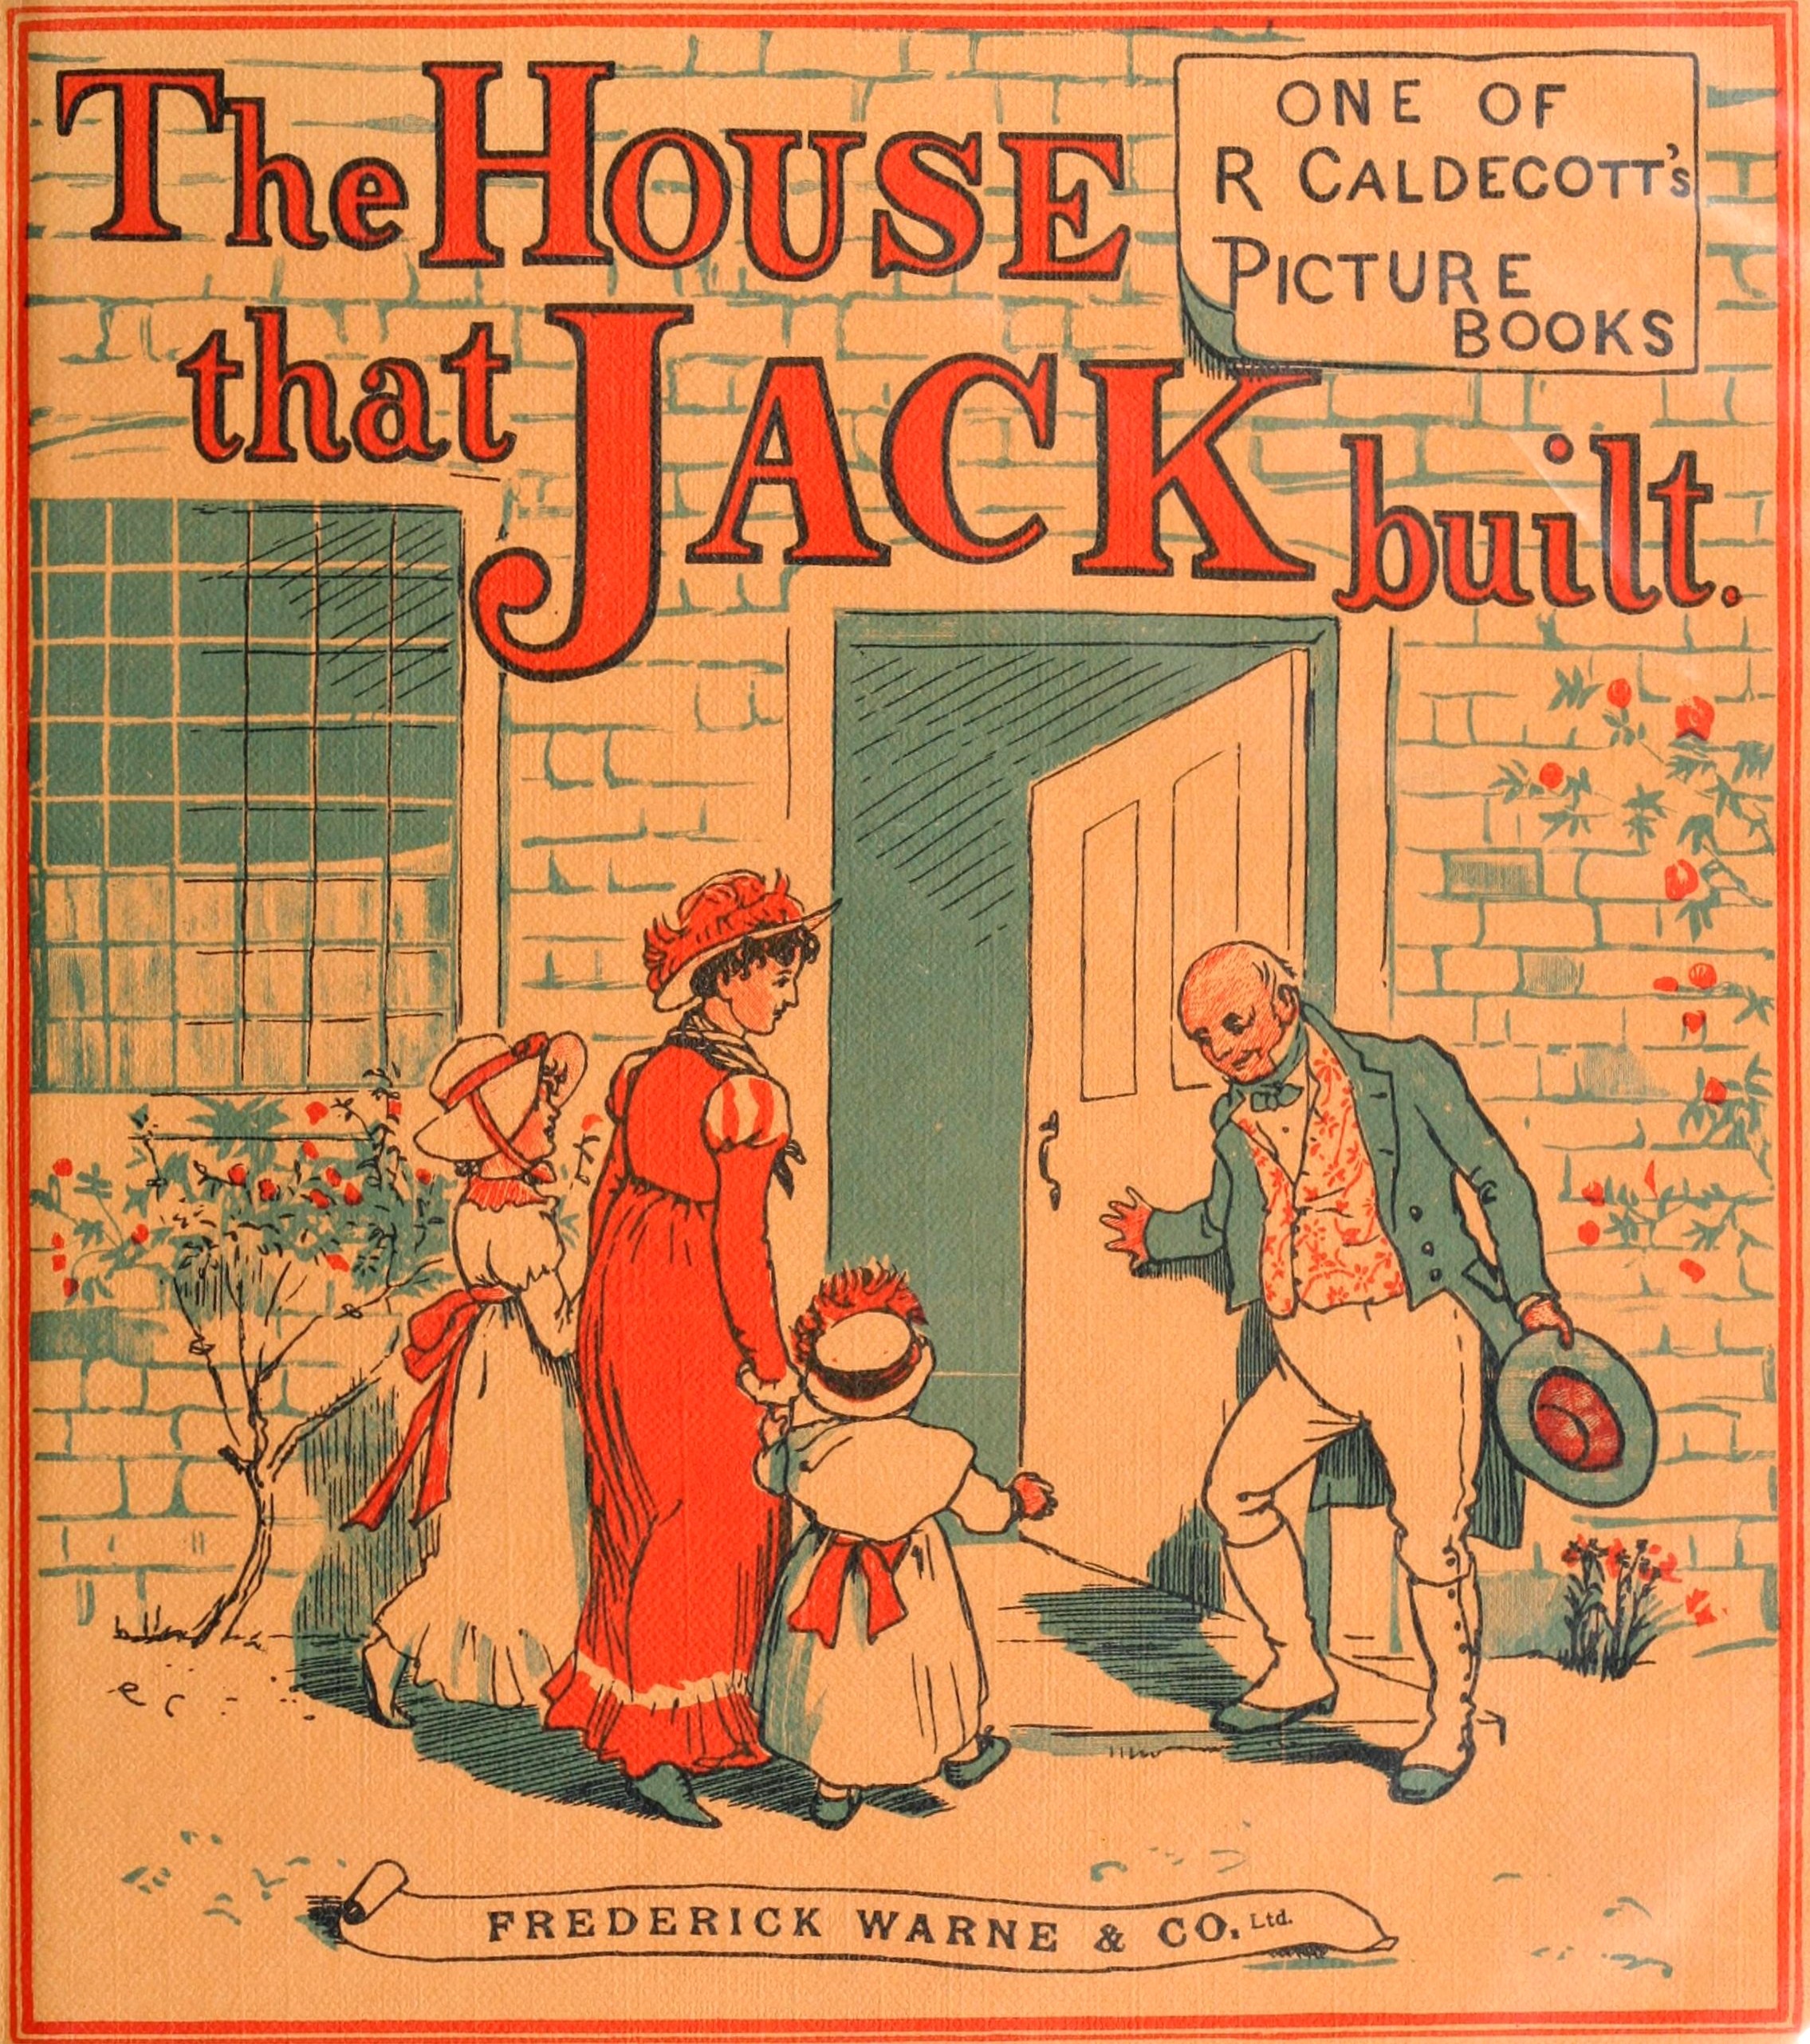 The House That Jack Built [1900]